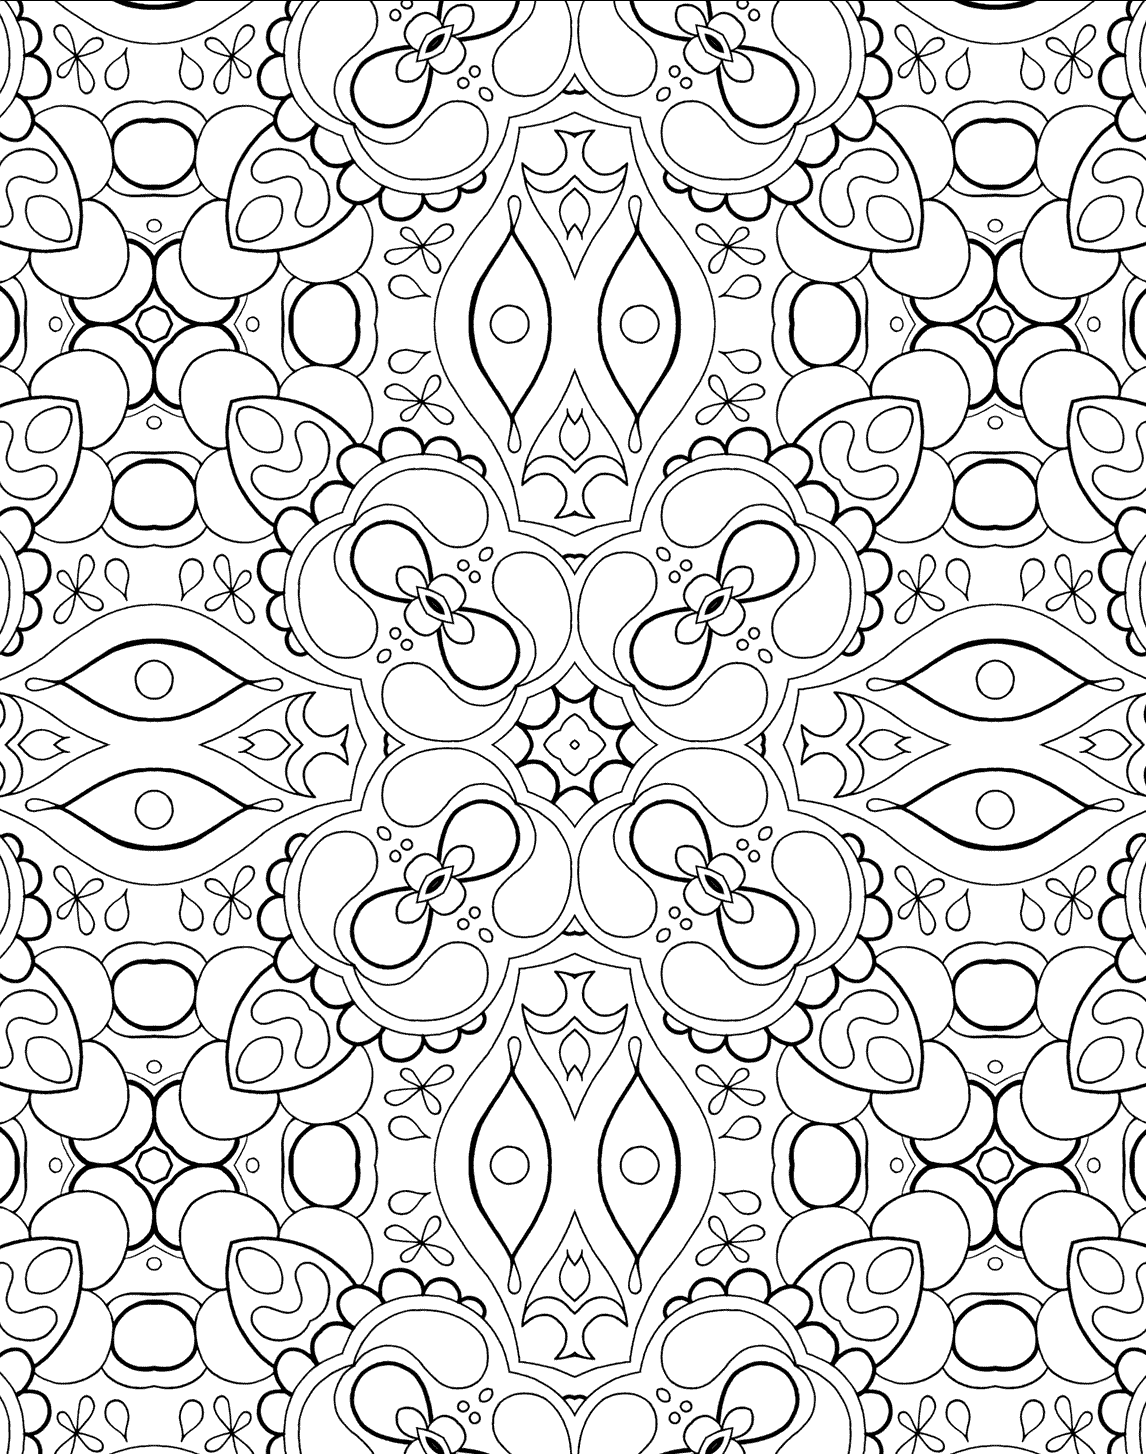 Mandala Mindfulness Coloring Page - Free Printable Coloring Pages for Kids